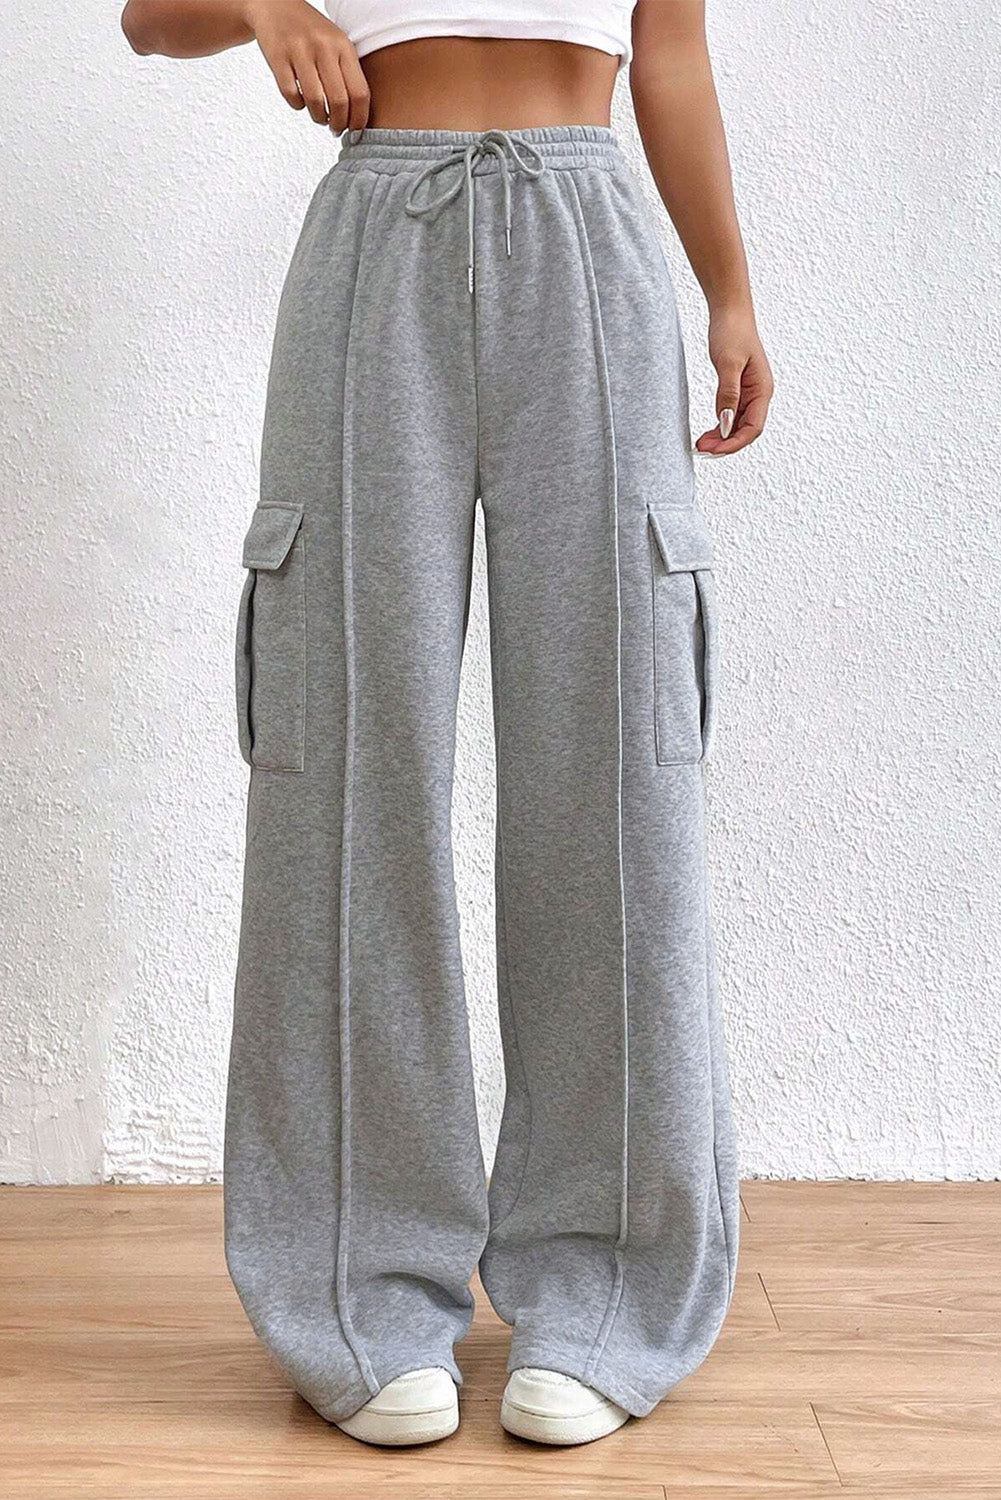 Drawstring High Waist Pants- Wild Willows Boutique NY – Massapequa, New York. Affordable and fashionable clothing for women of all ages. Bottoms, tops, dresses, intimates, outerwear, sweaters, shoes, accessories, jewelry, activewear and more//wild Willow Boutique